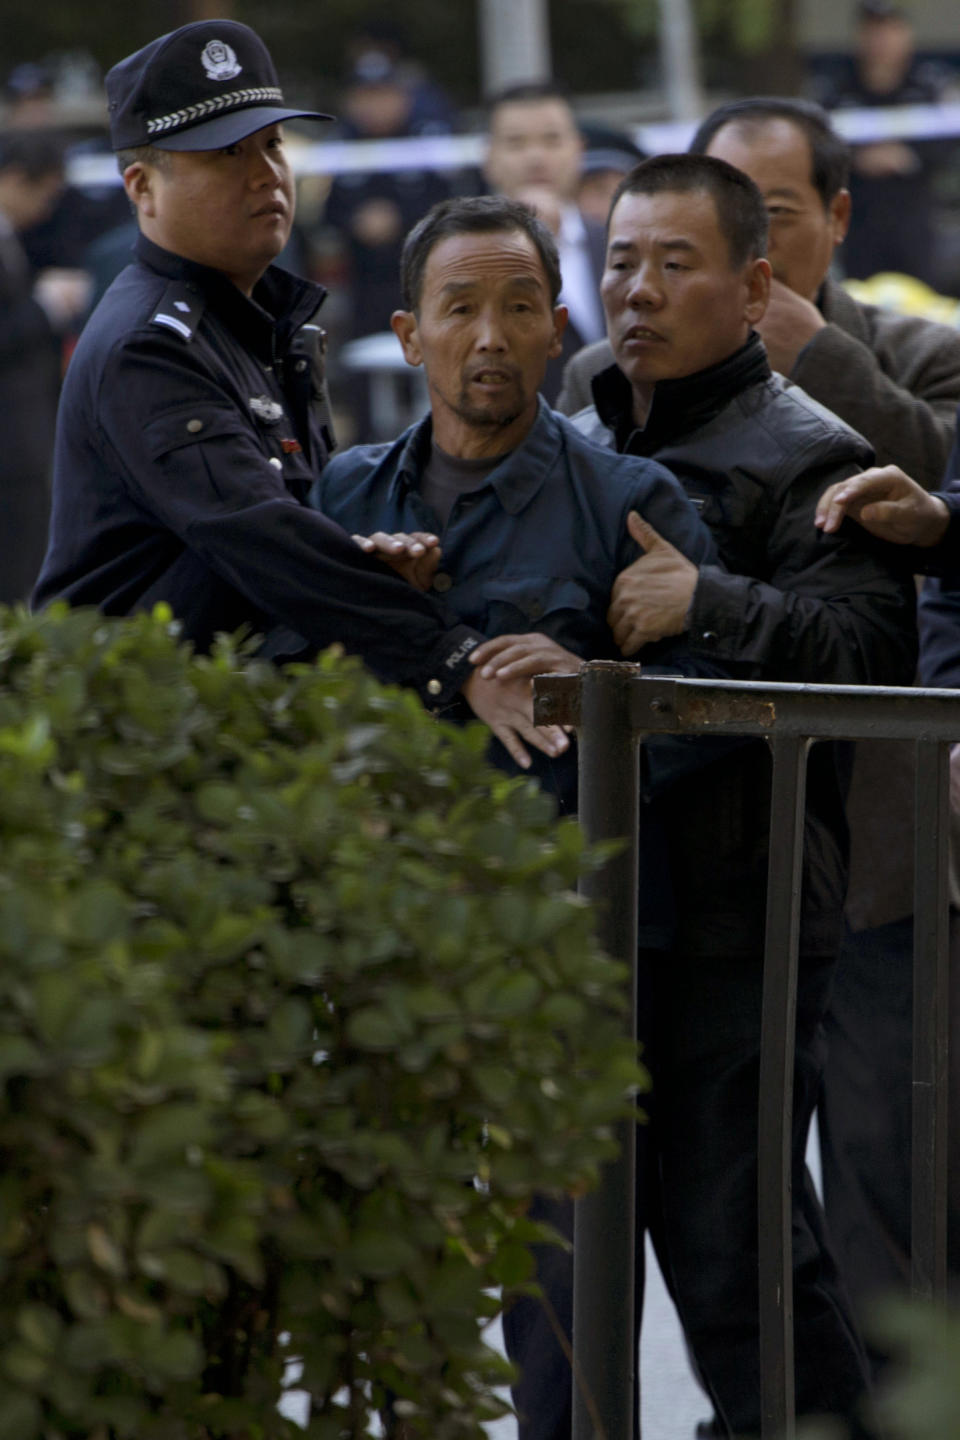 Ji Darong, center, the father of Beijing airport bomber Ji Zhongxing, is stopped by a Chinese police officer and plain clothes security personnel from approaching journalists gathered outside the Beijing Chaoyang District Court where Ji Zhongxing faced verdict and sentencing in Beijing, China, Tuesday, Oct. 15, 2013. Ji Zhongxing, a partly paralyzed man who exploded a bomb inside Beijing's airport in hopes of winning redress over an alleged beating by public officials, was given a six-year prison sentence Tuesday. (AP Photo/Ng Han Guan)